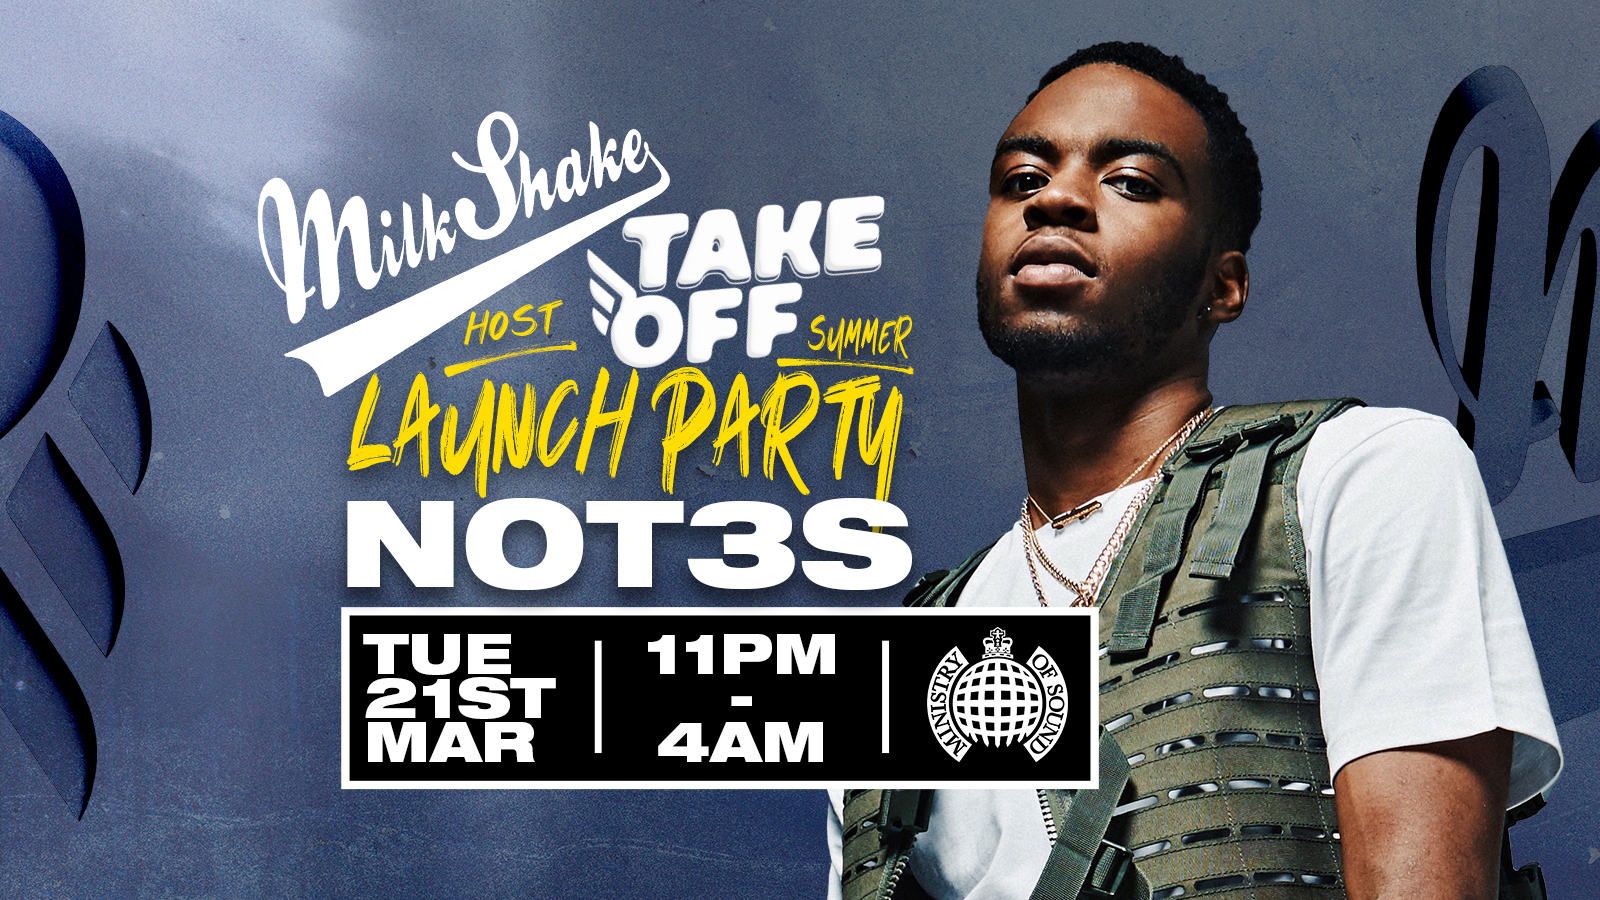 Milkshake, Ministry of Sound | ft NOT3S – The Take Off Festival Launch Party ✈️